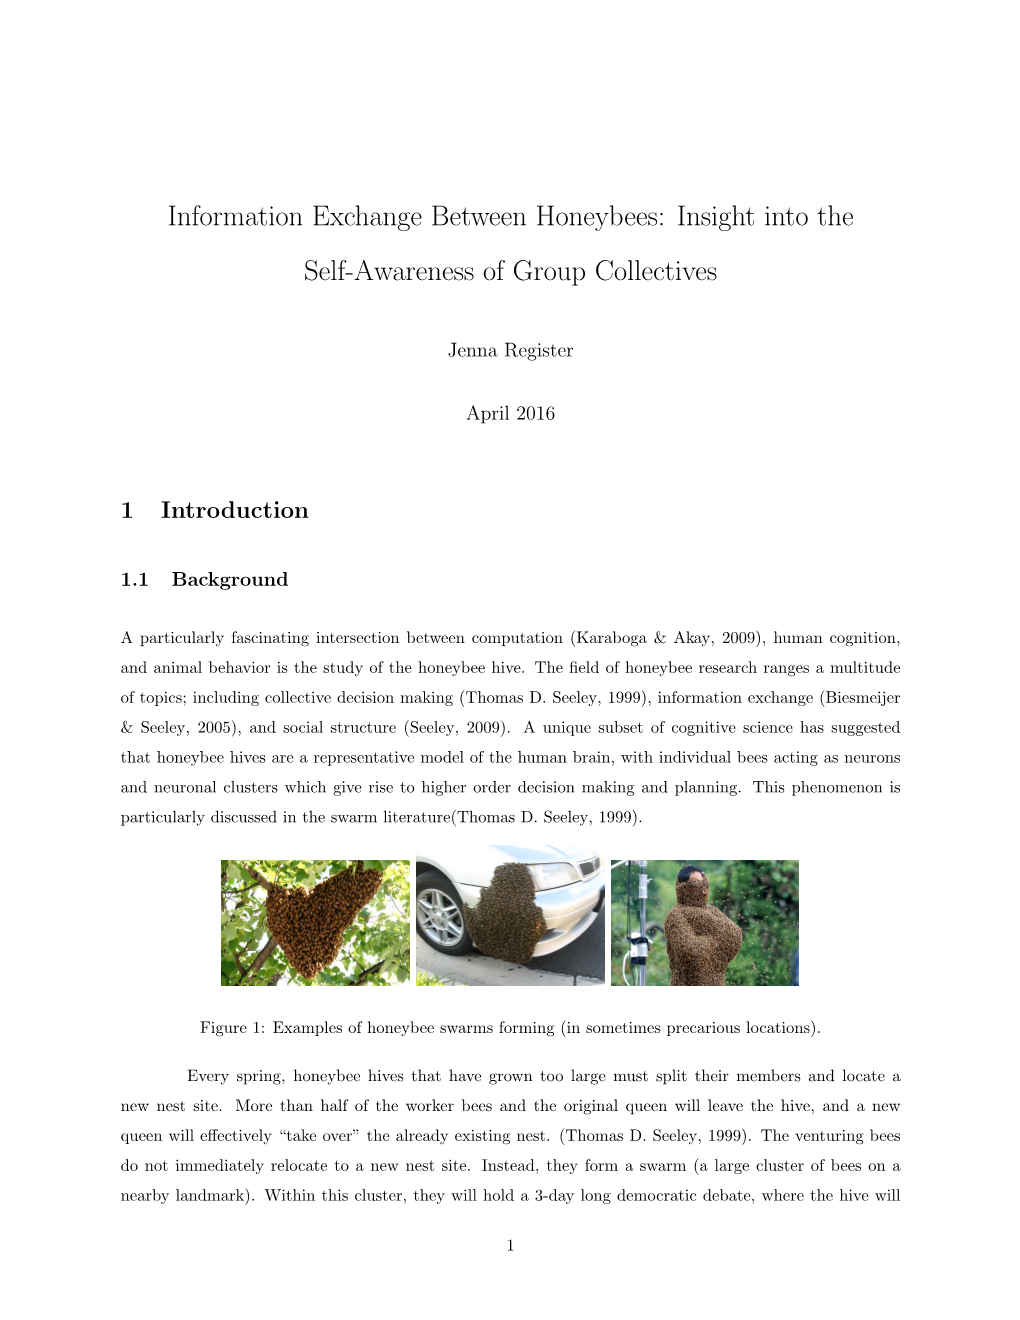 Information Exchange Between Honeybees: Insight Into the Self-Awareness of Group Collectives